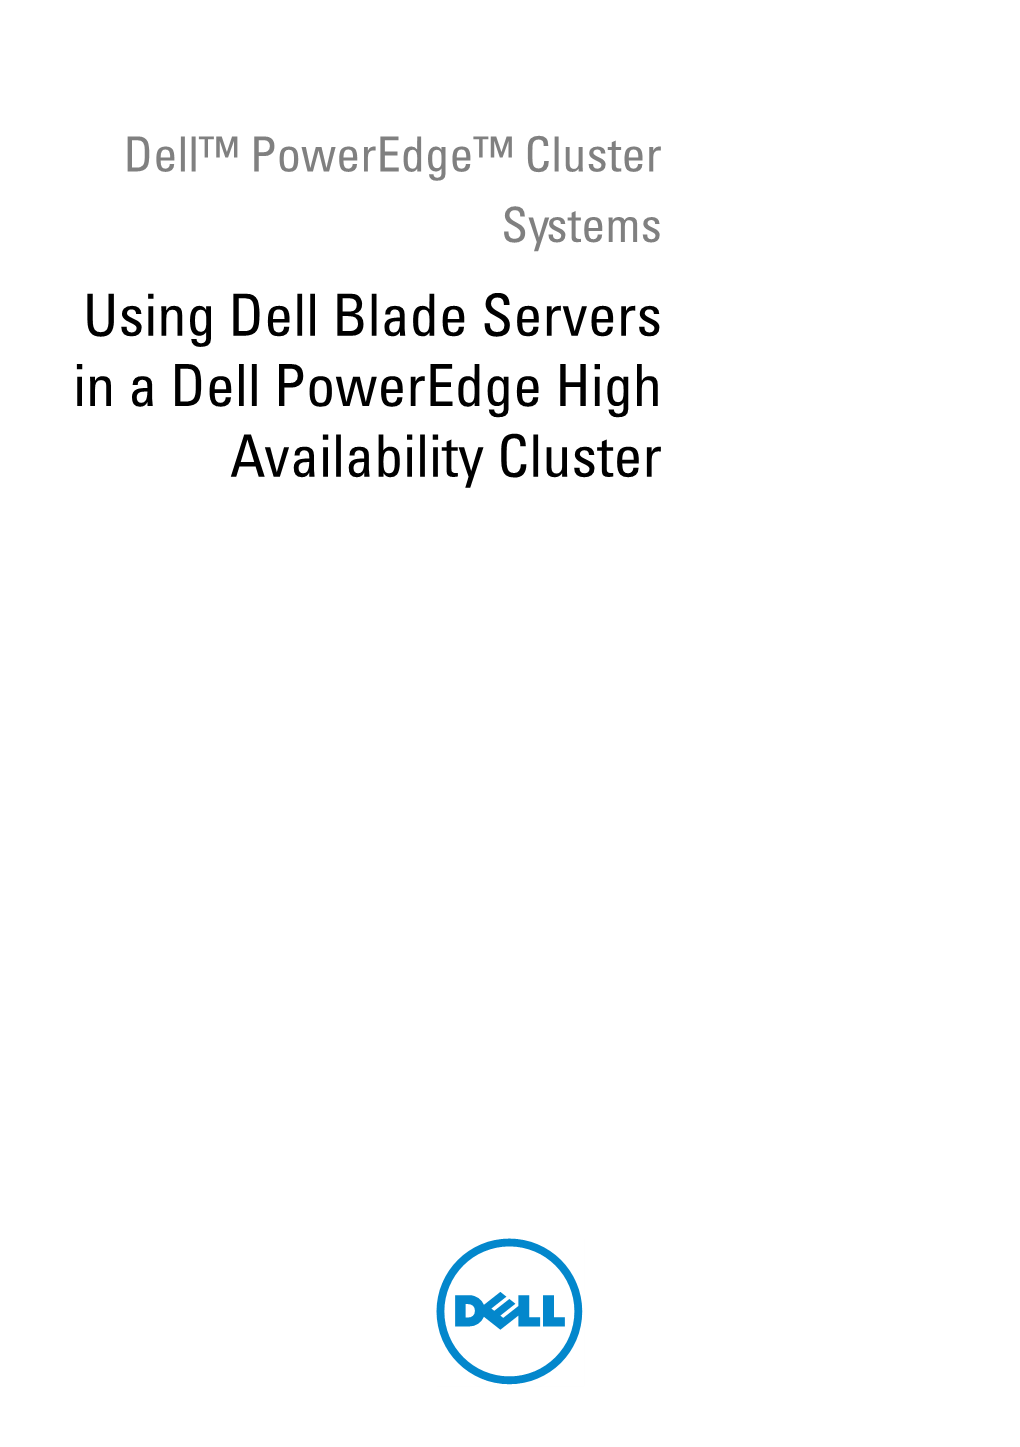 Using Dell Blade Servers in a Dell Poweredge HA Cluster